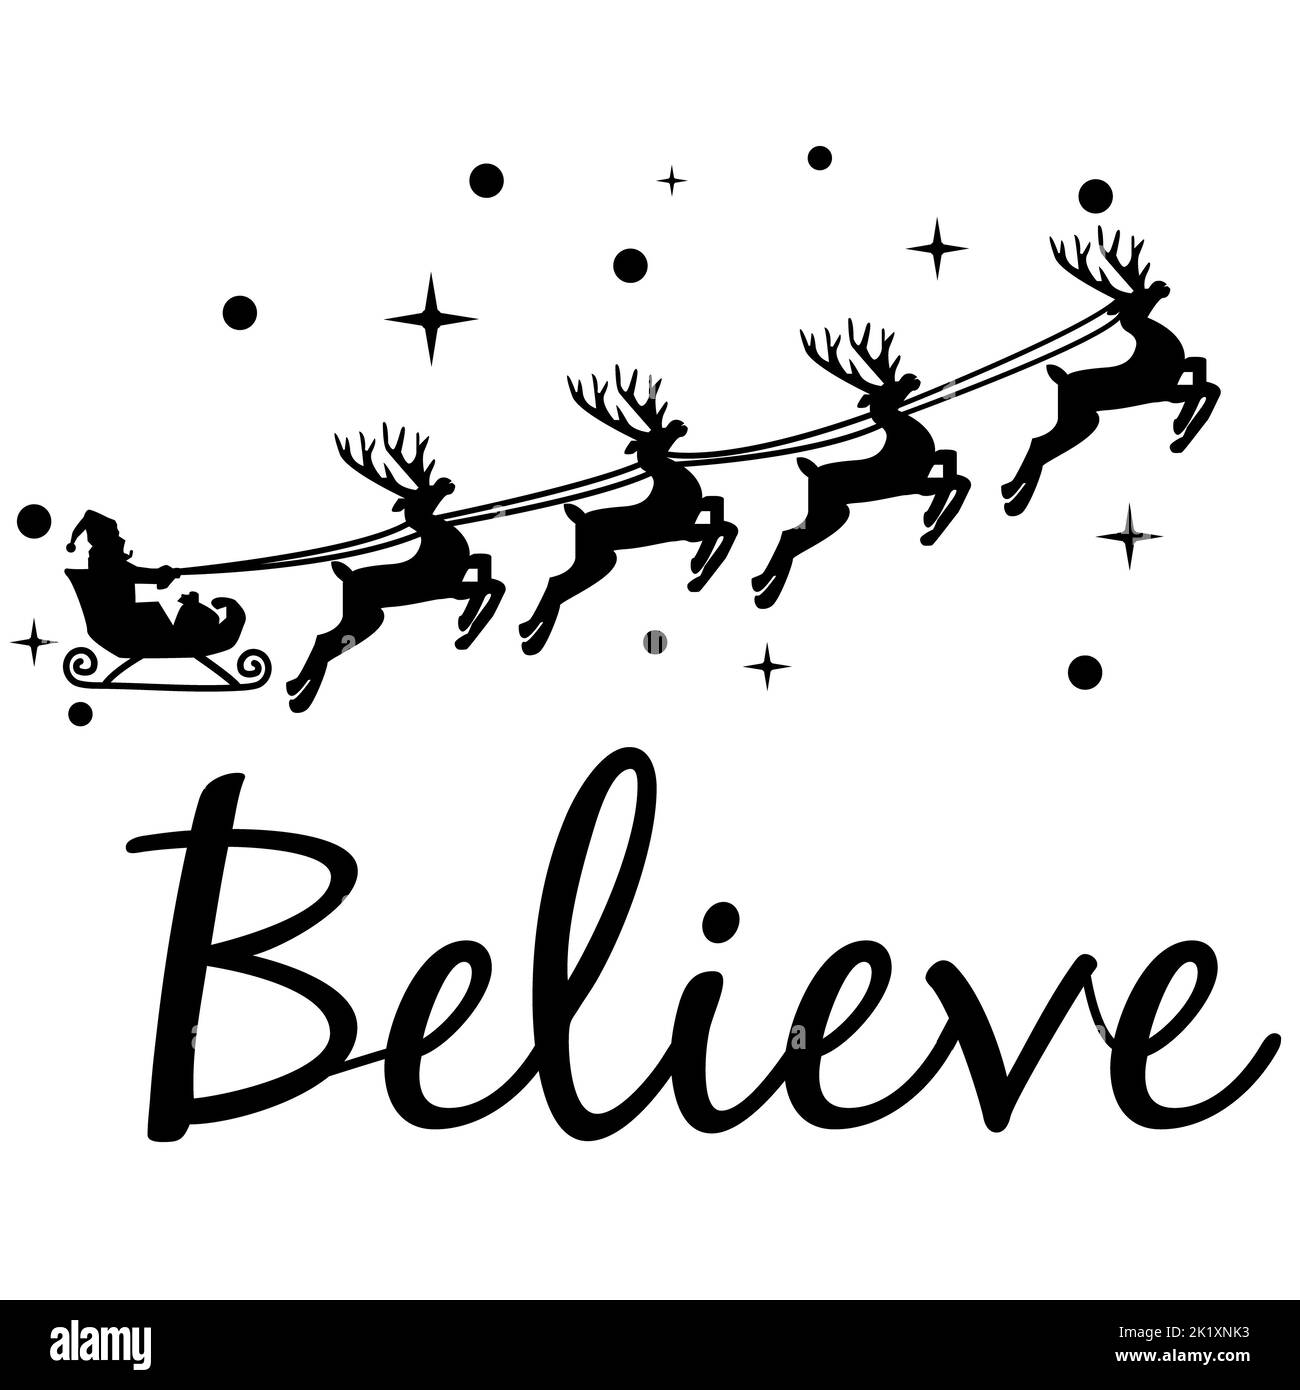 Believe sign on white background. Christmas quotes sign. Santa symbol. Believe in Santa. flat style. Stock Photo